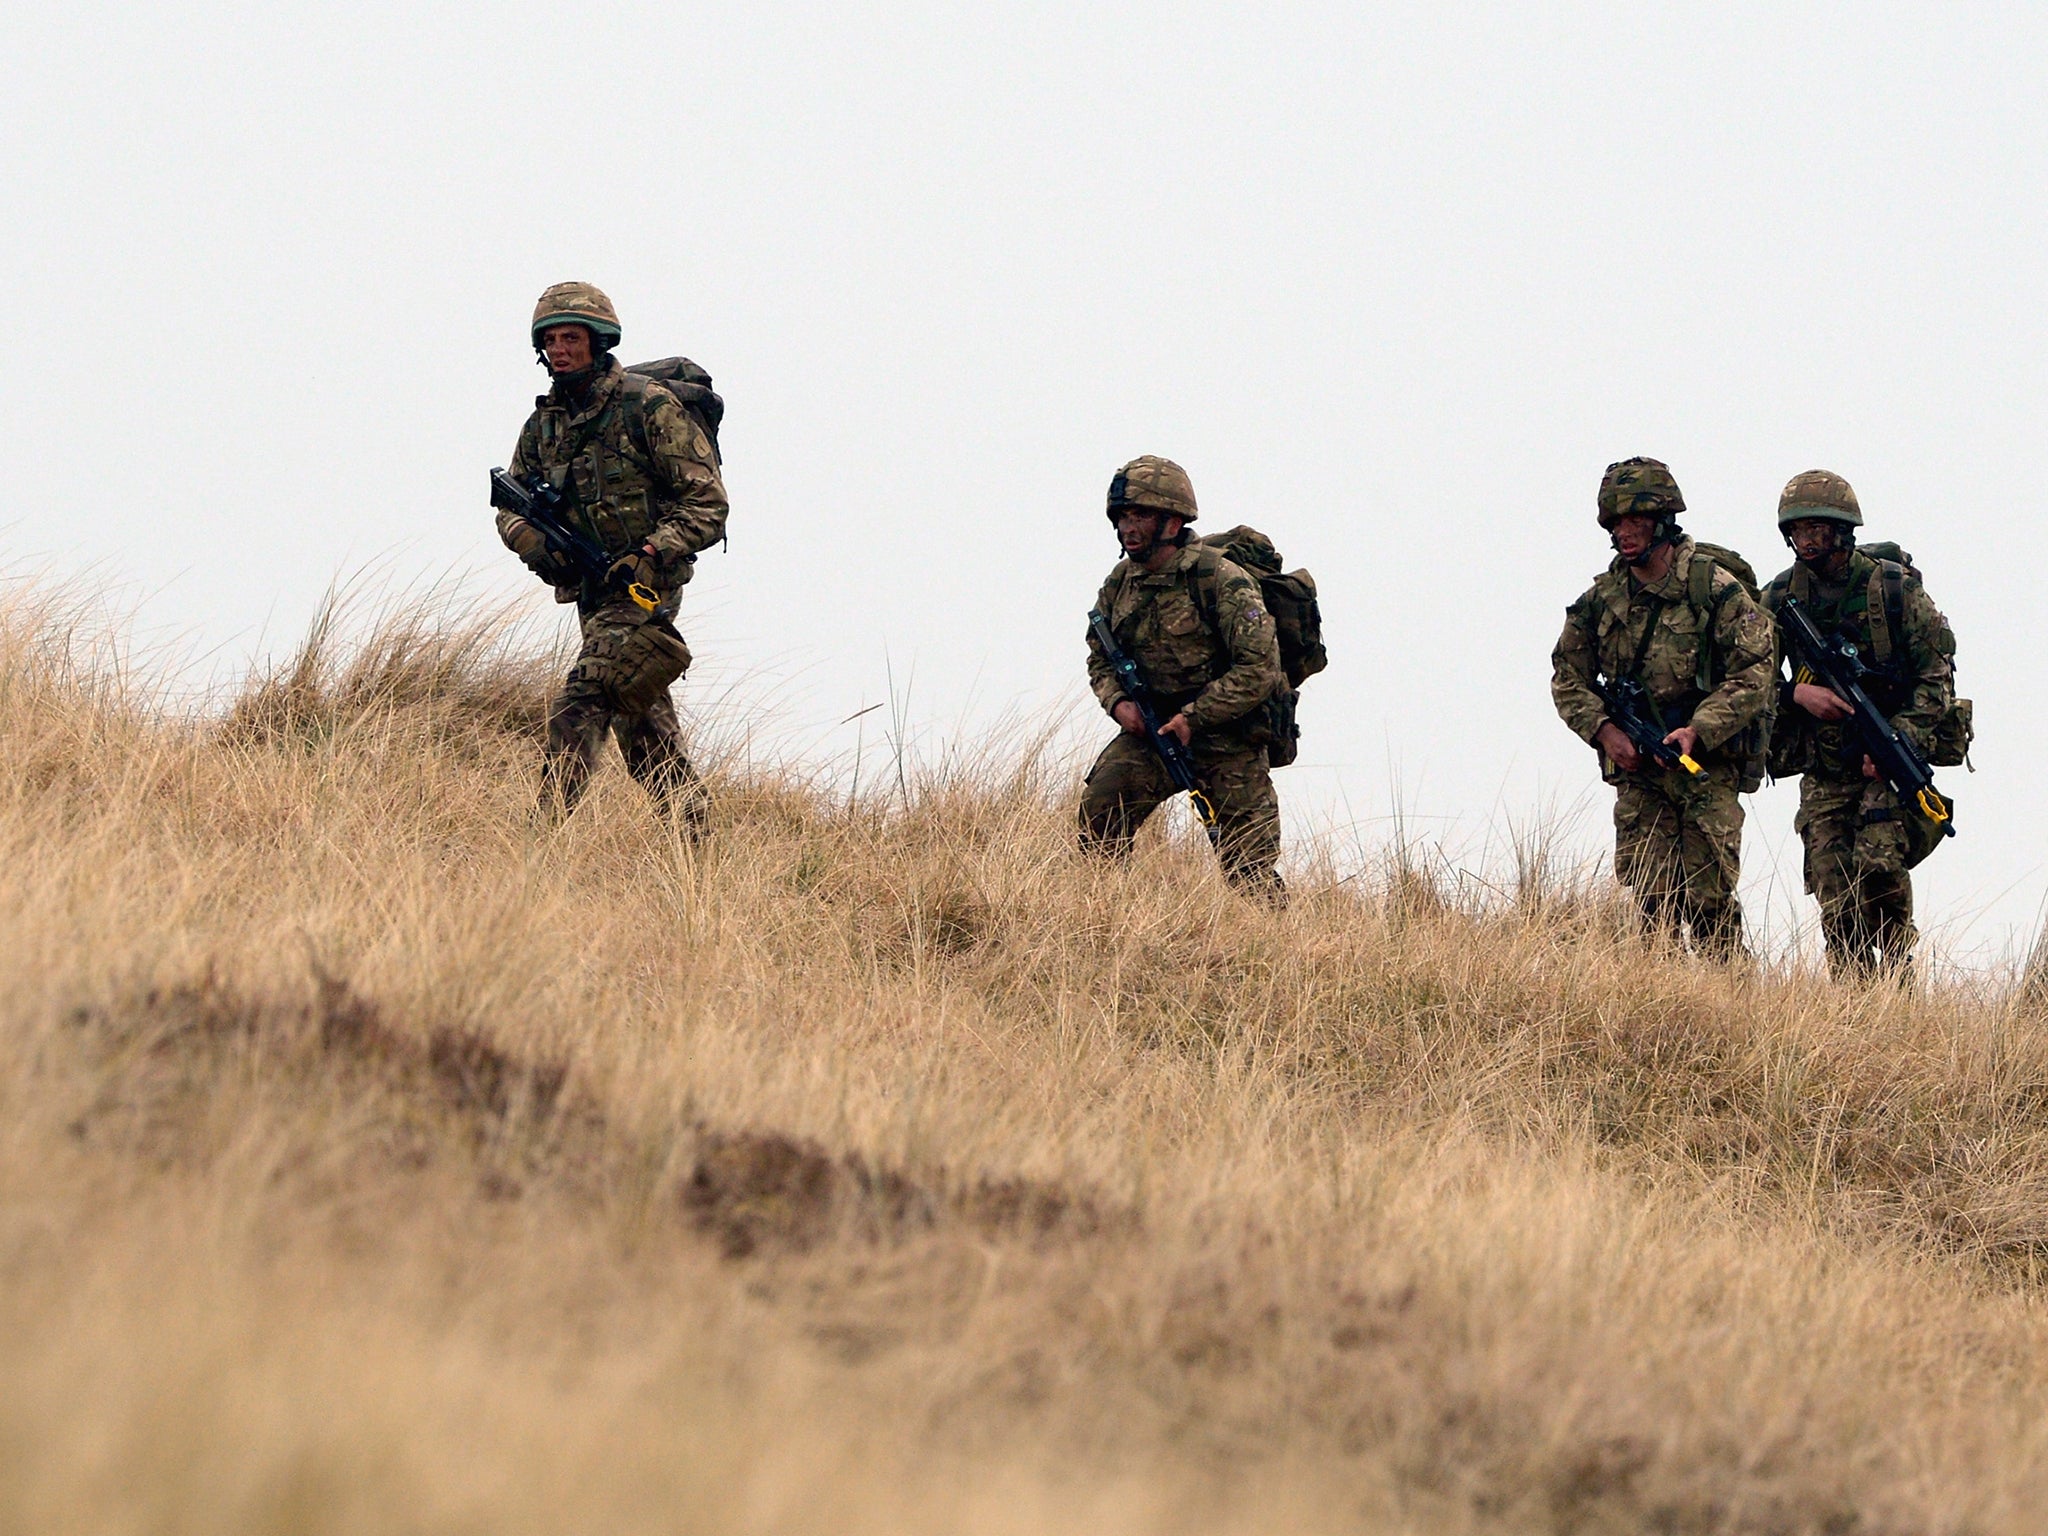 The government is planning to use SAS special forces and drone strikes to fight against Isis